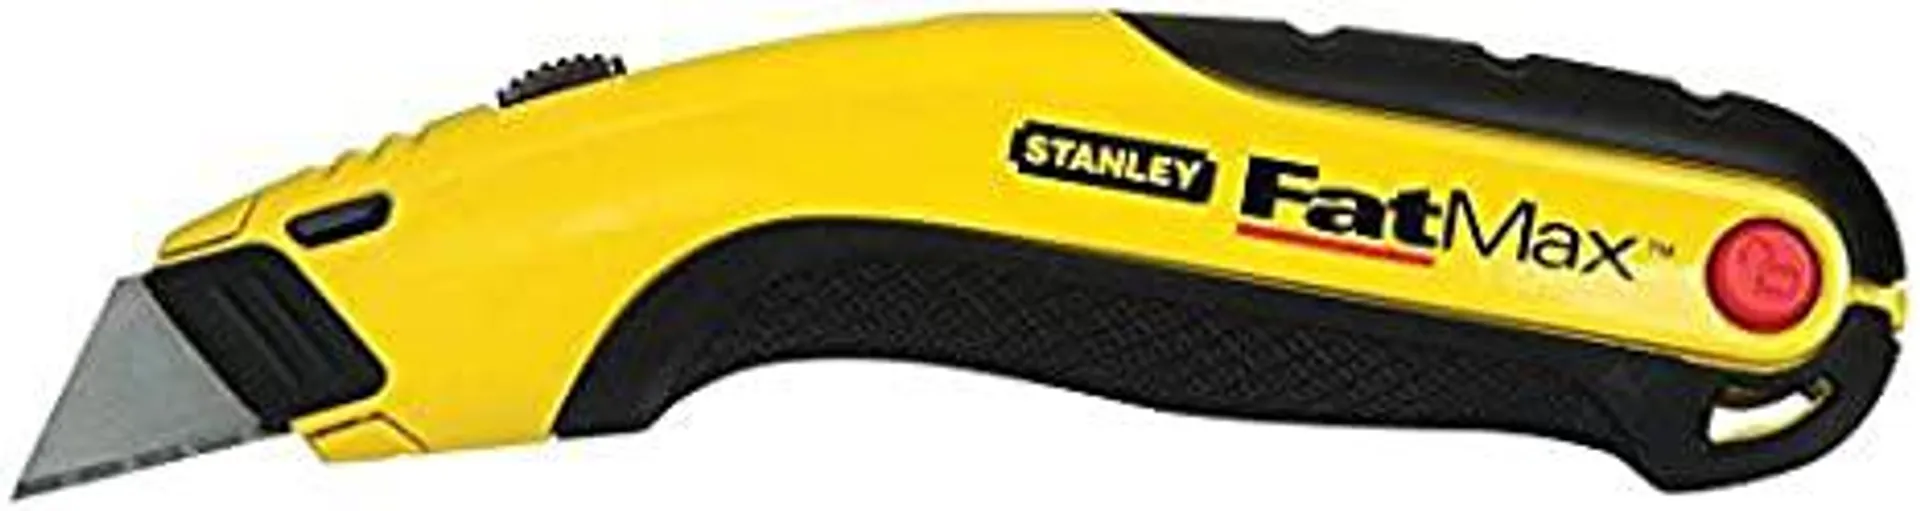 Stanley Fat Max 10-778 Stanley Fat Max Retractable Utility Knife